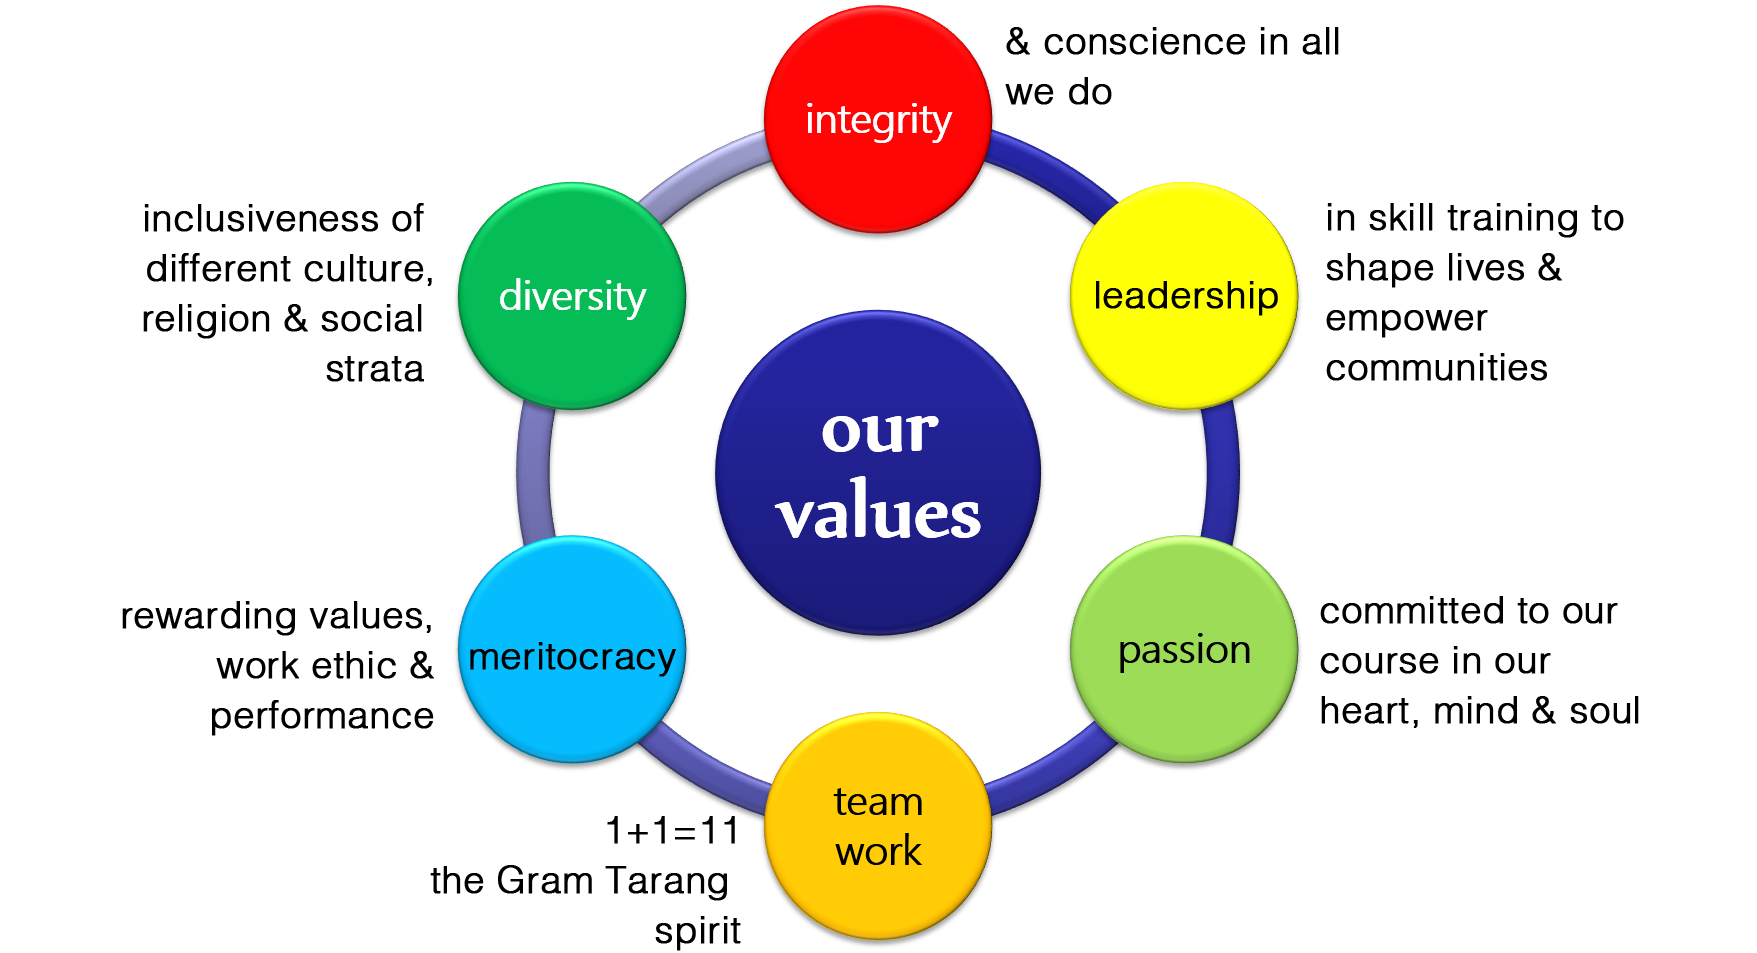 Values differences. Cultural values. Our values. Value в искусстве. Kinds of values.